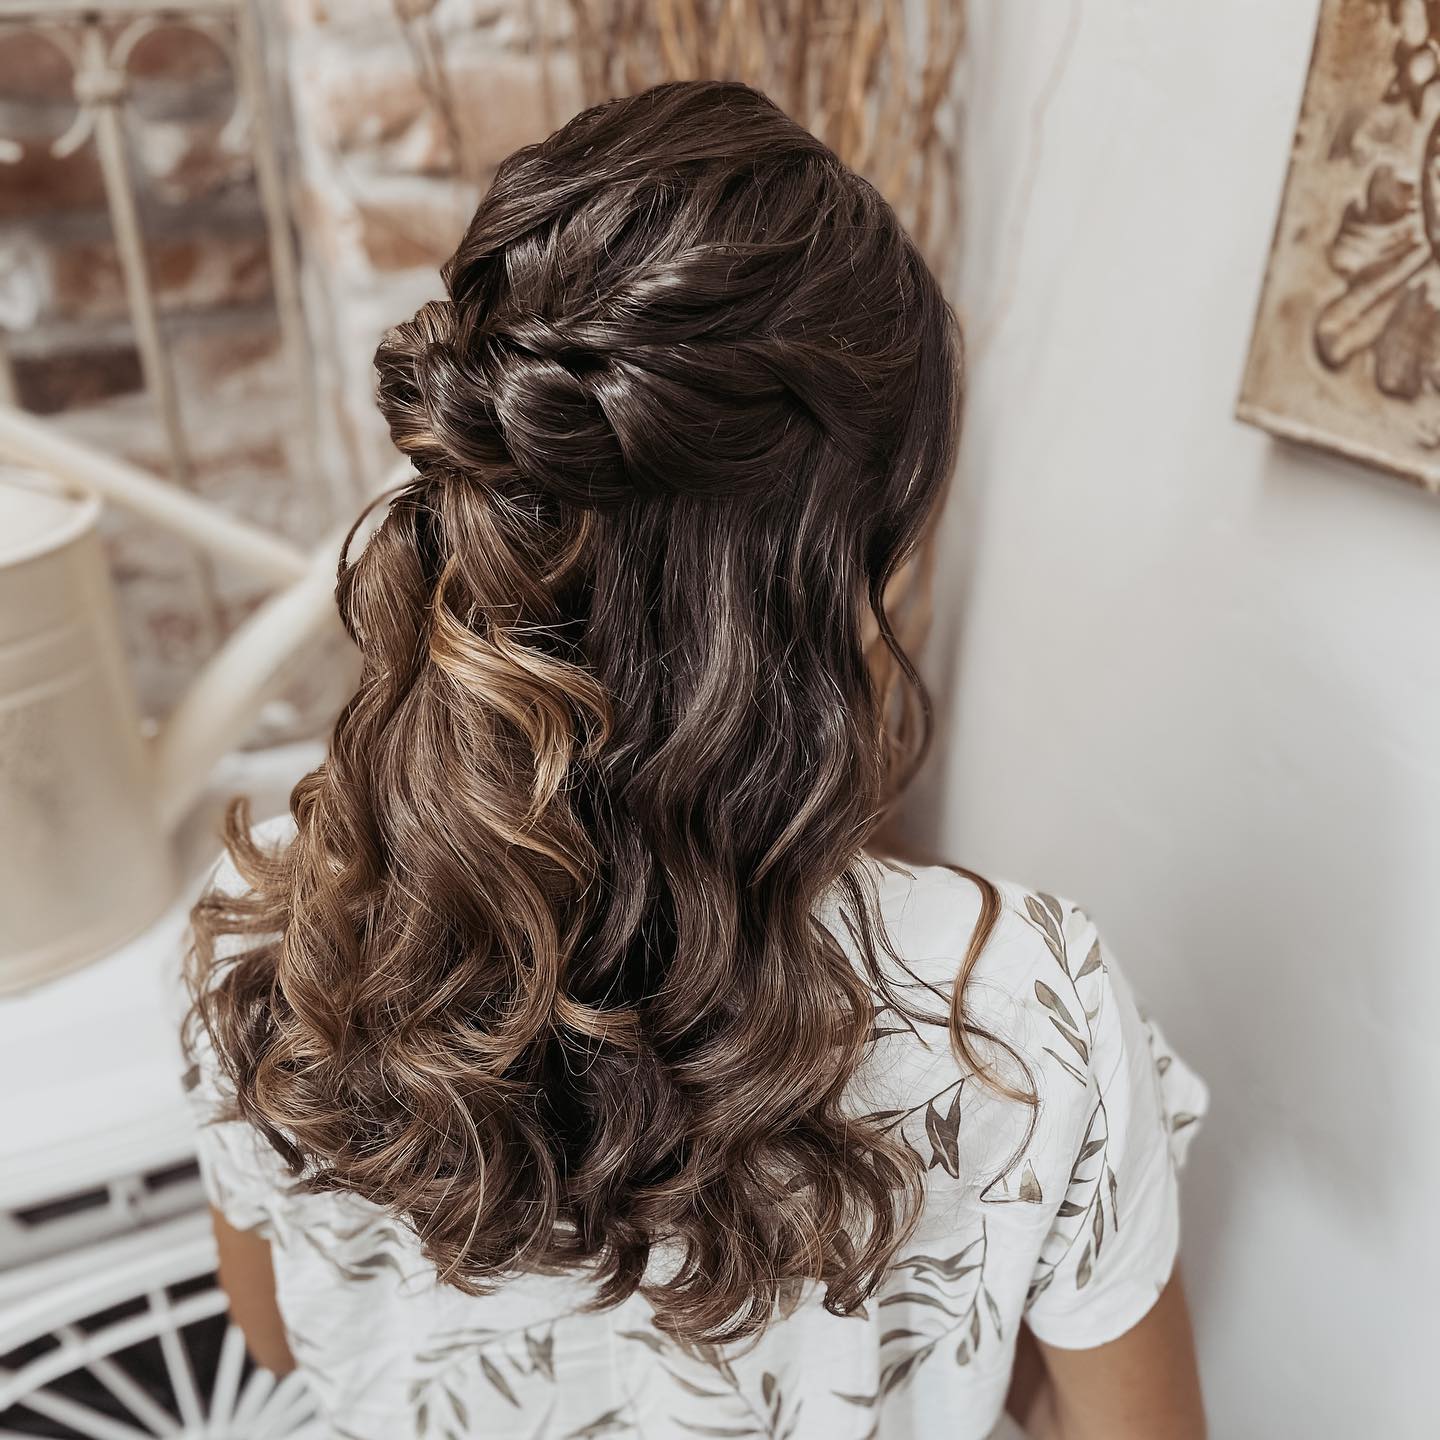 Best Prom Hairstyles for Shoulder Length Hair. | Visual.ly